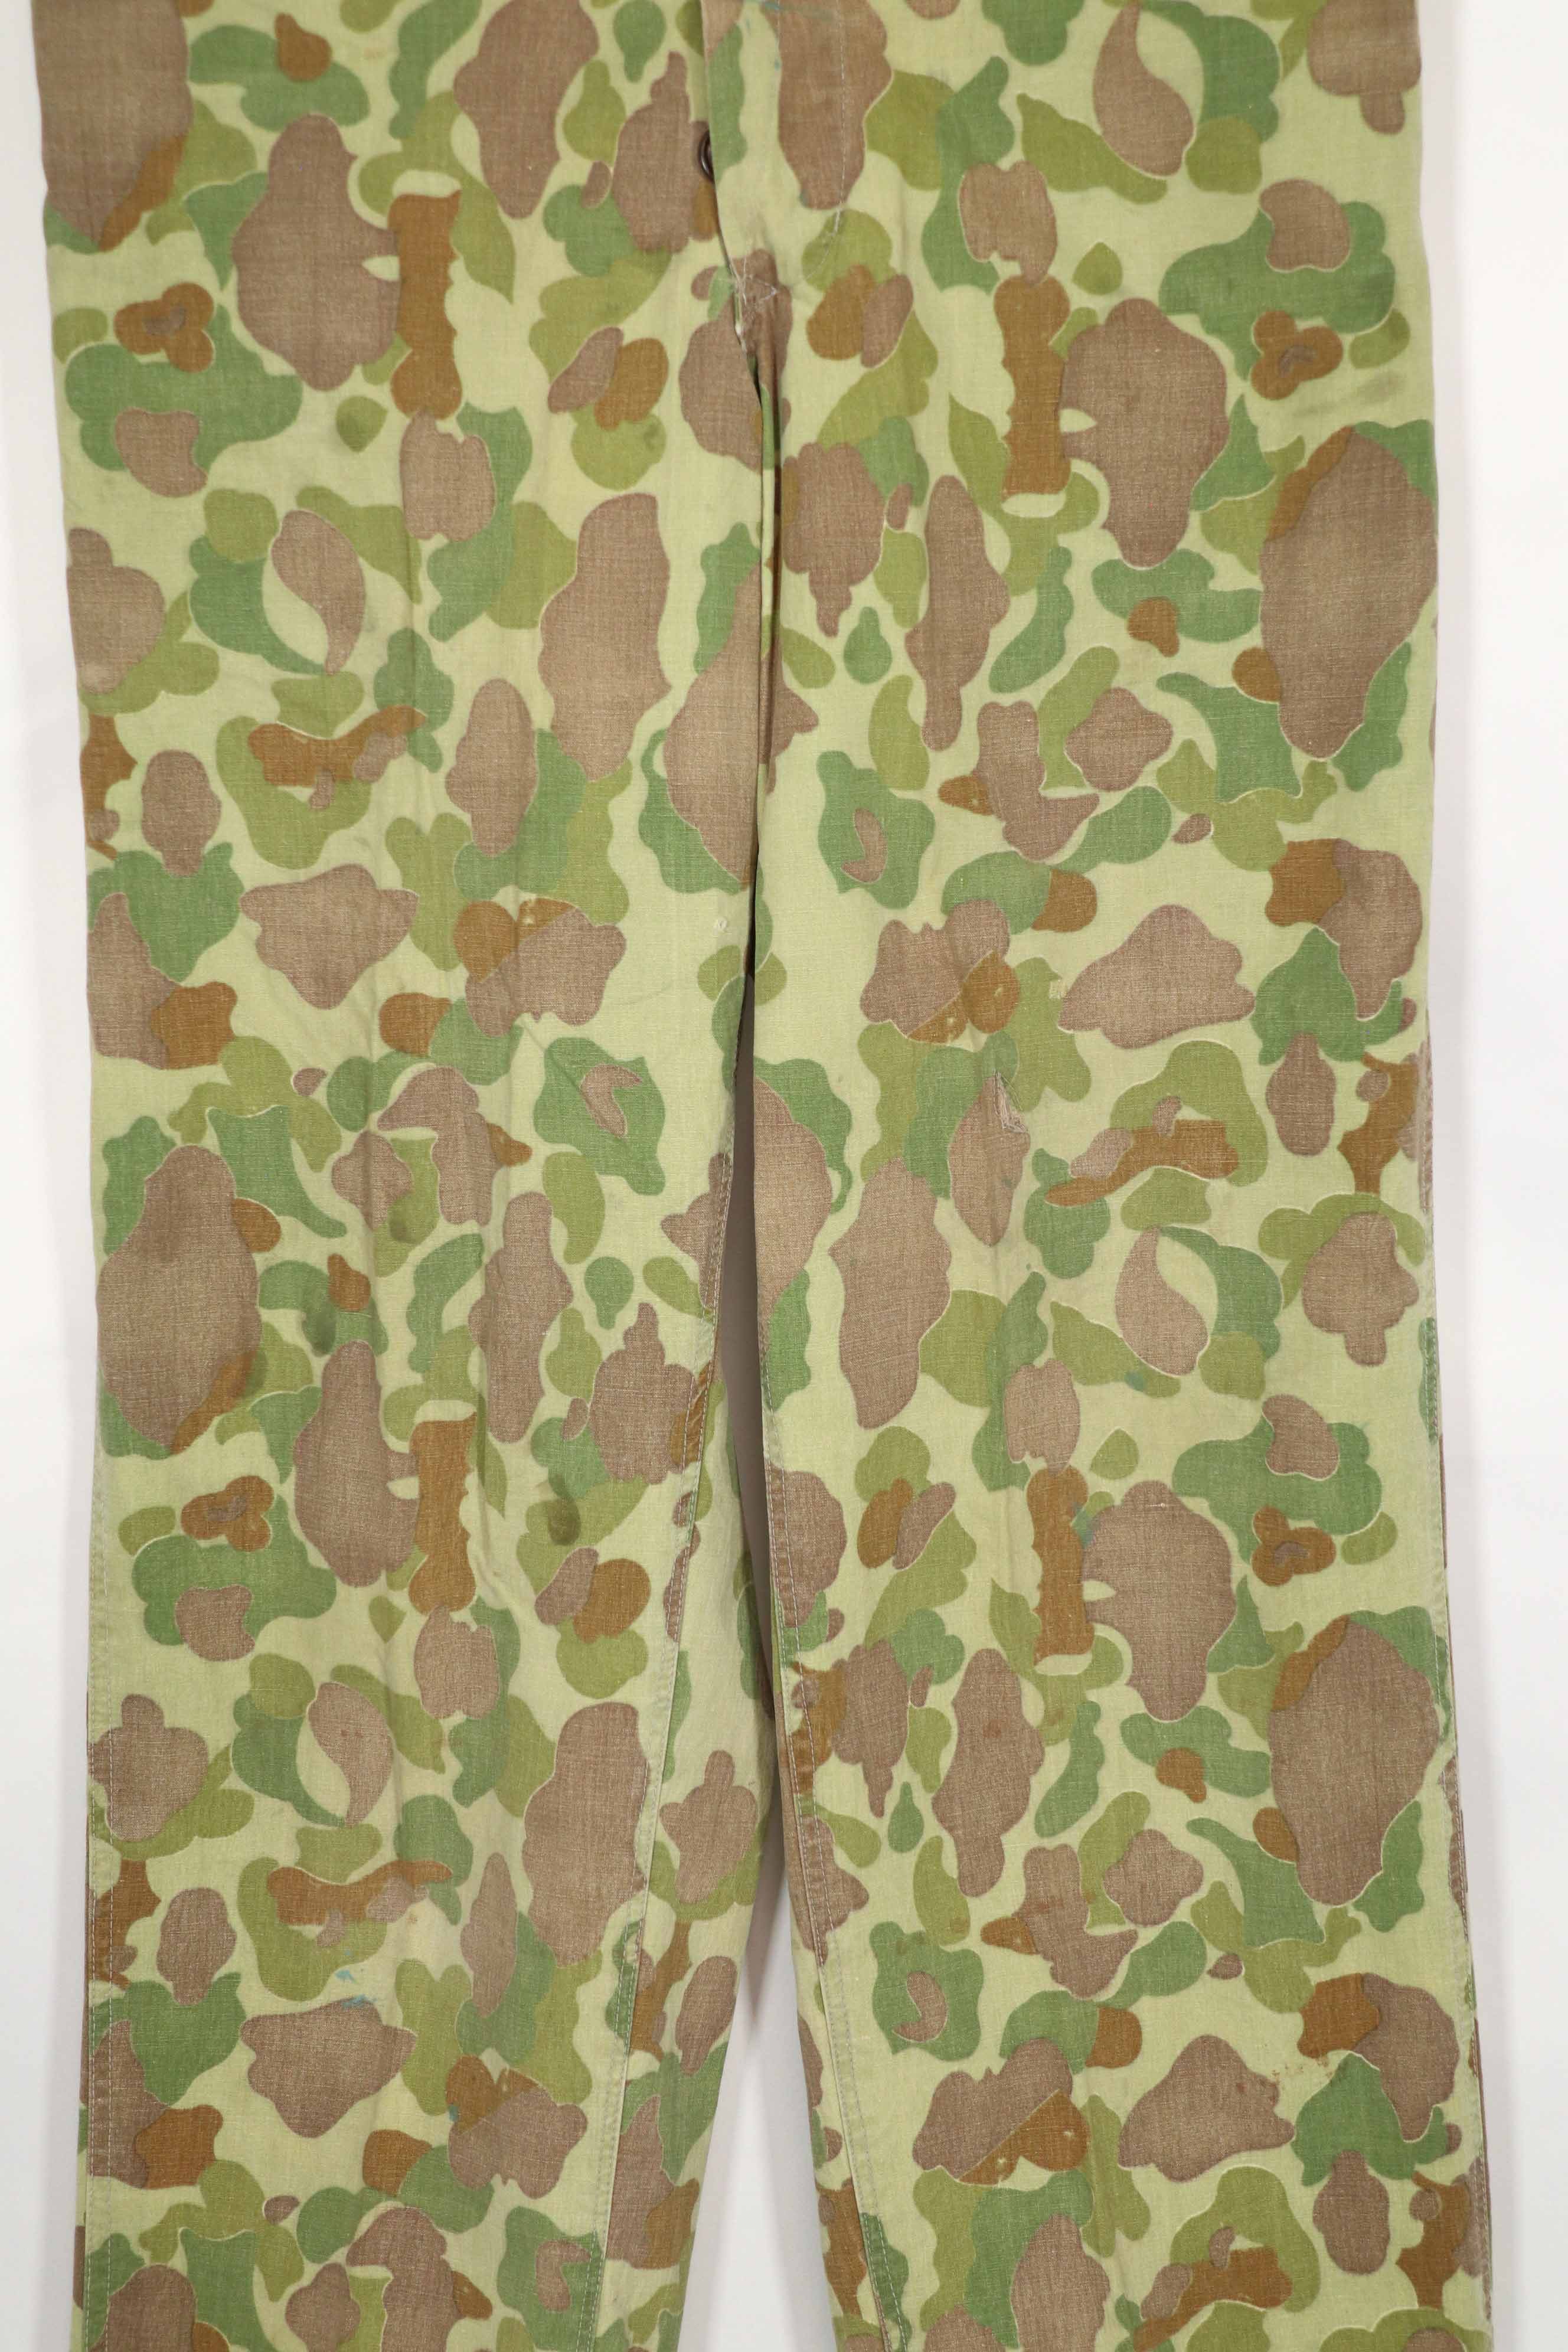 Real Fabric Frogskin Camouflage Pants Duck Hunter Used